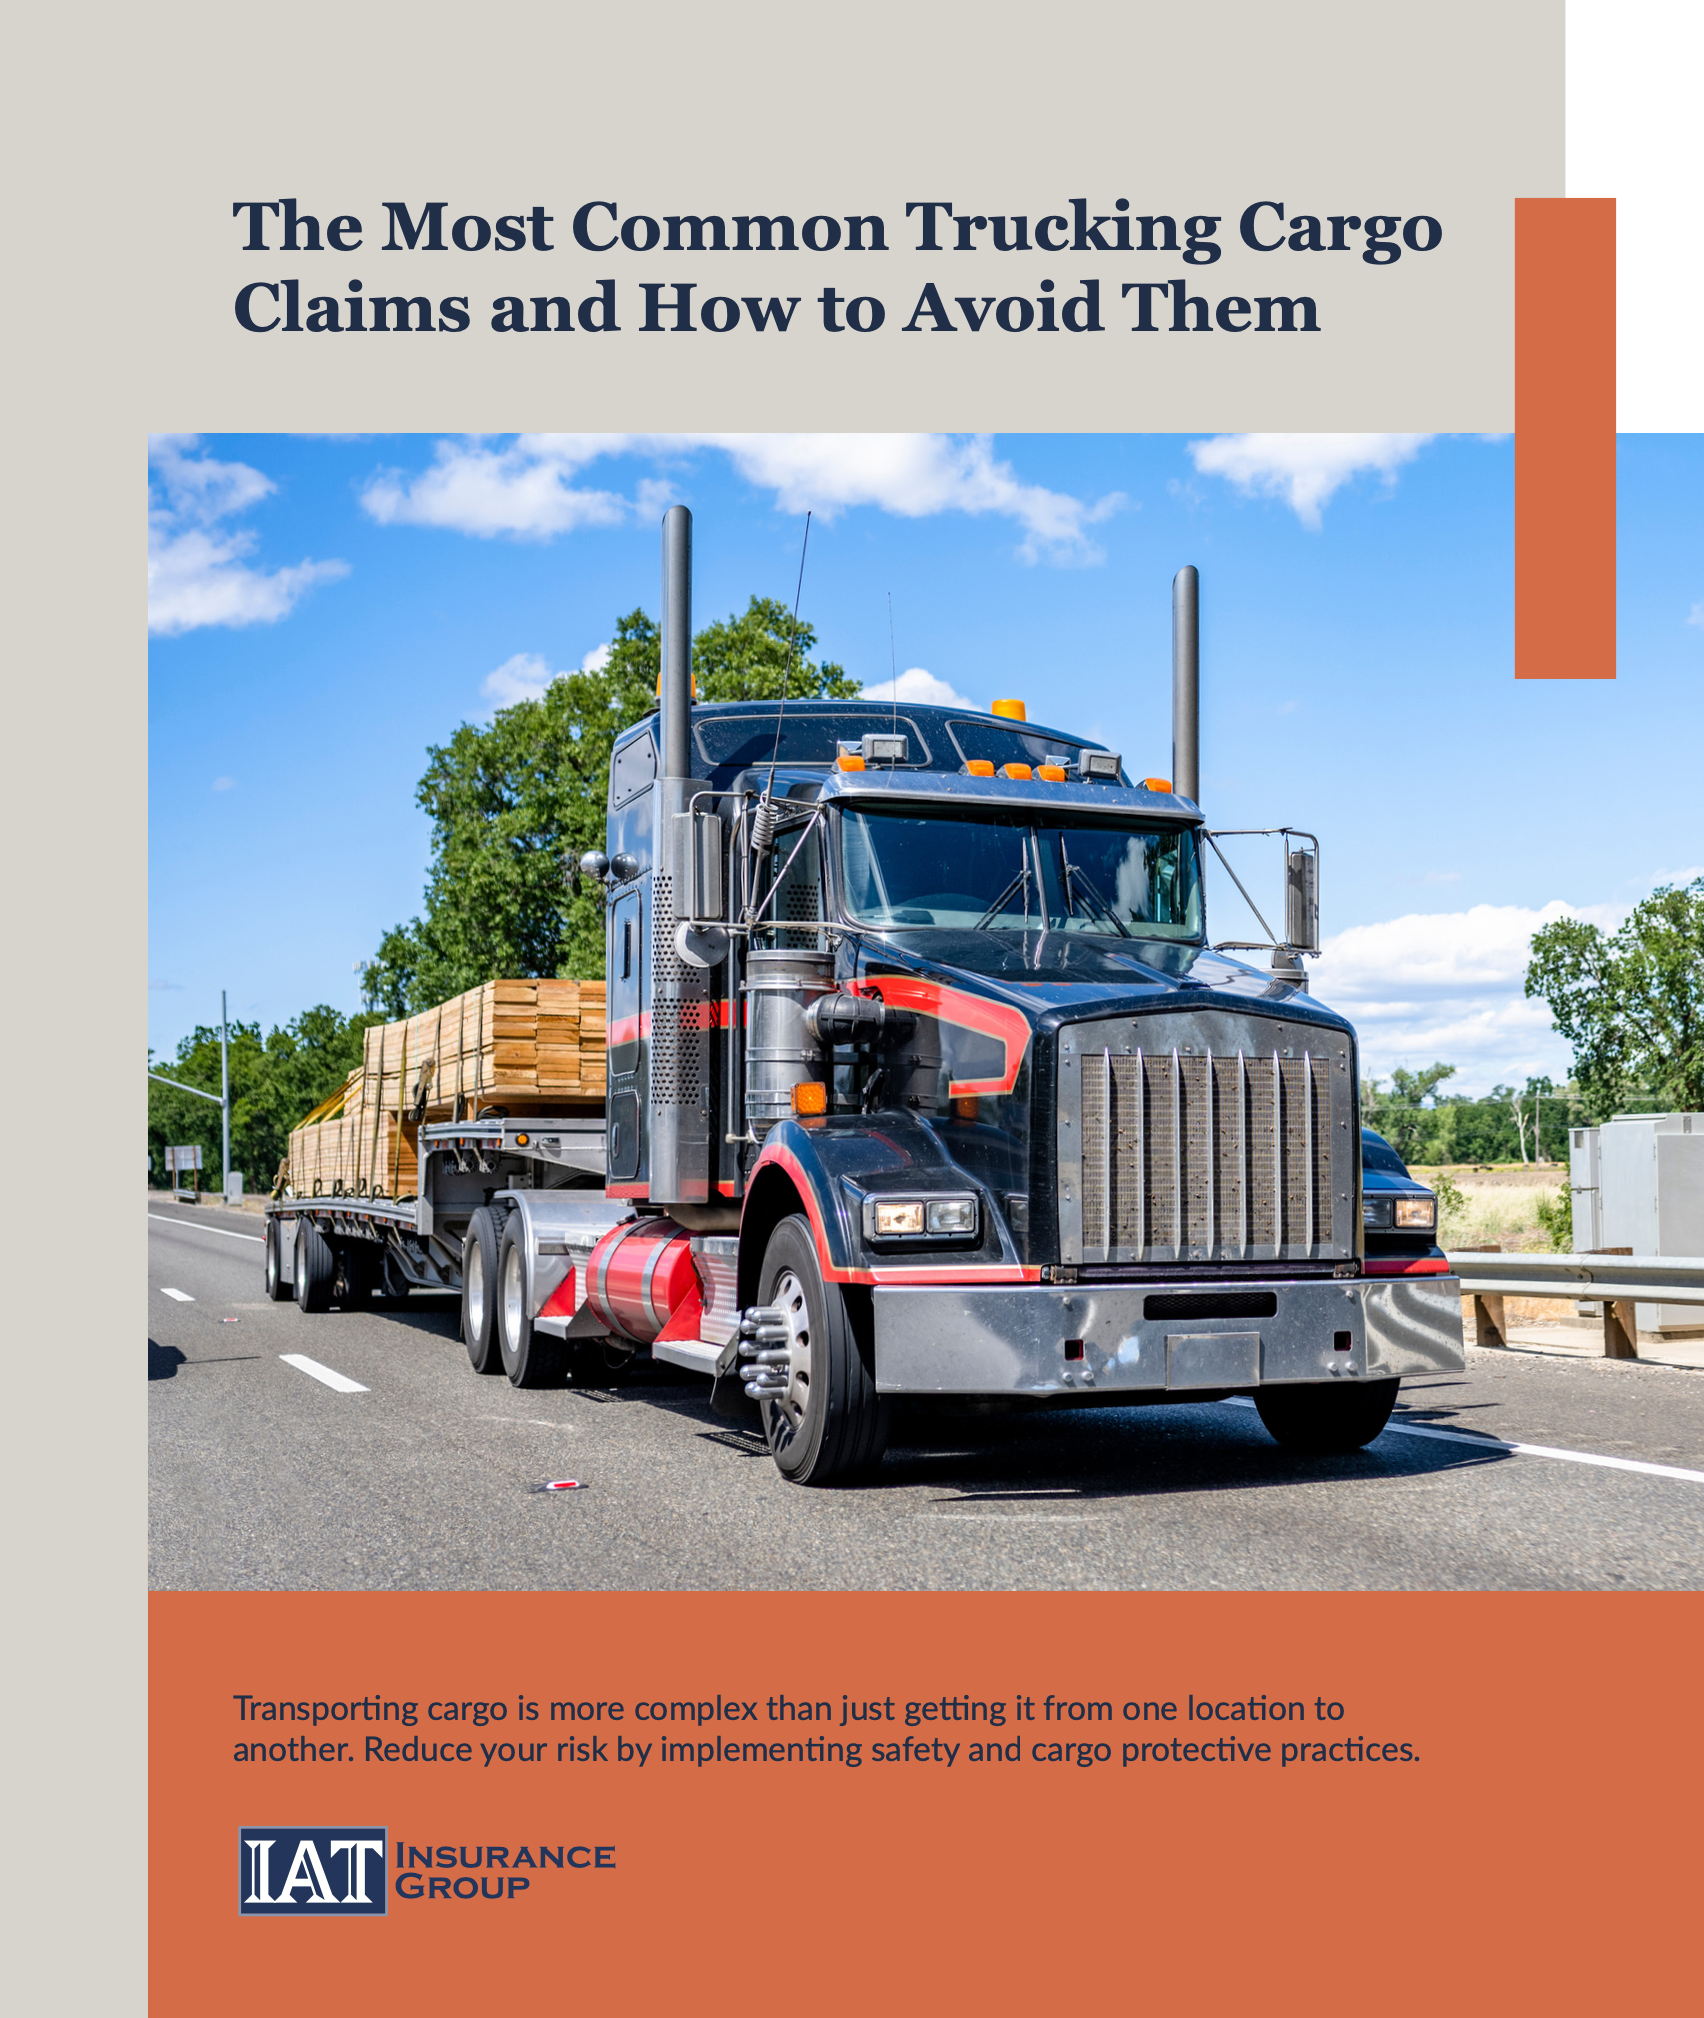 The Most Common Trucking Cargo Claims and How to Avoid Them